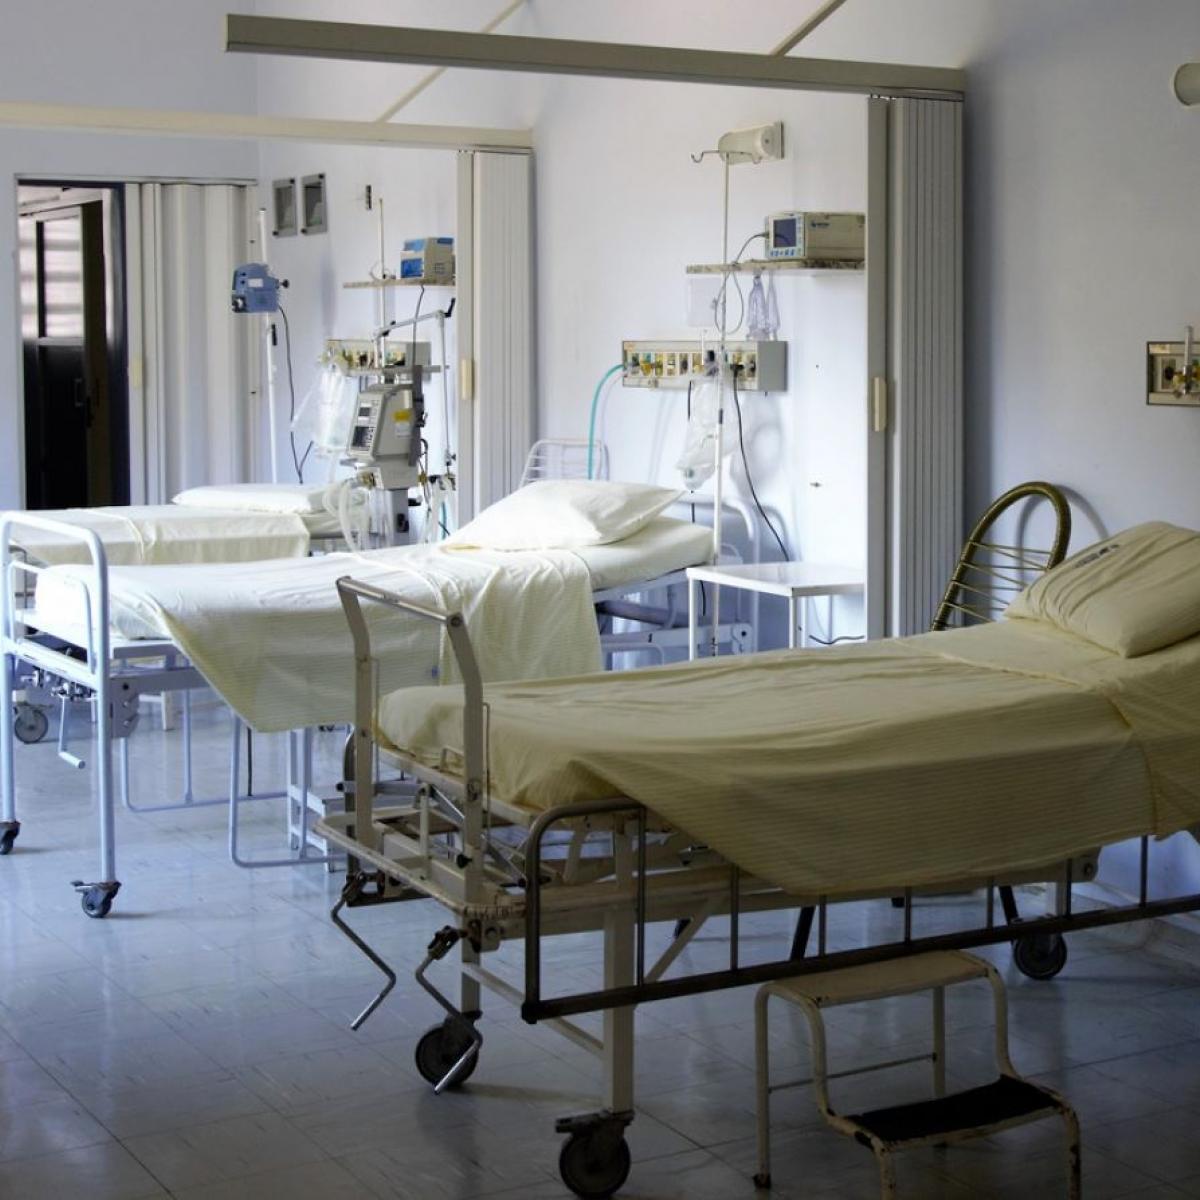 photo of hospital bed